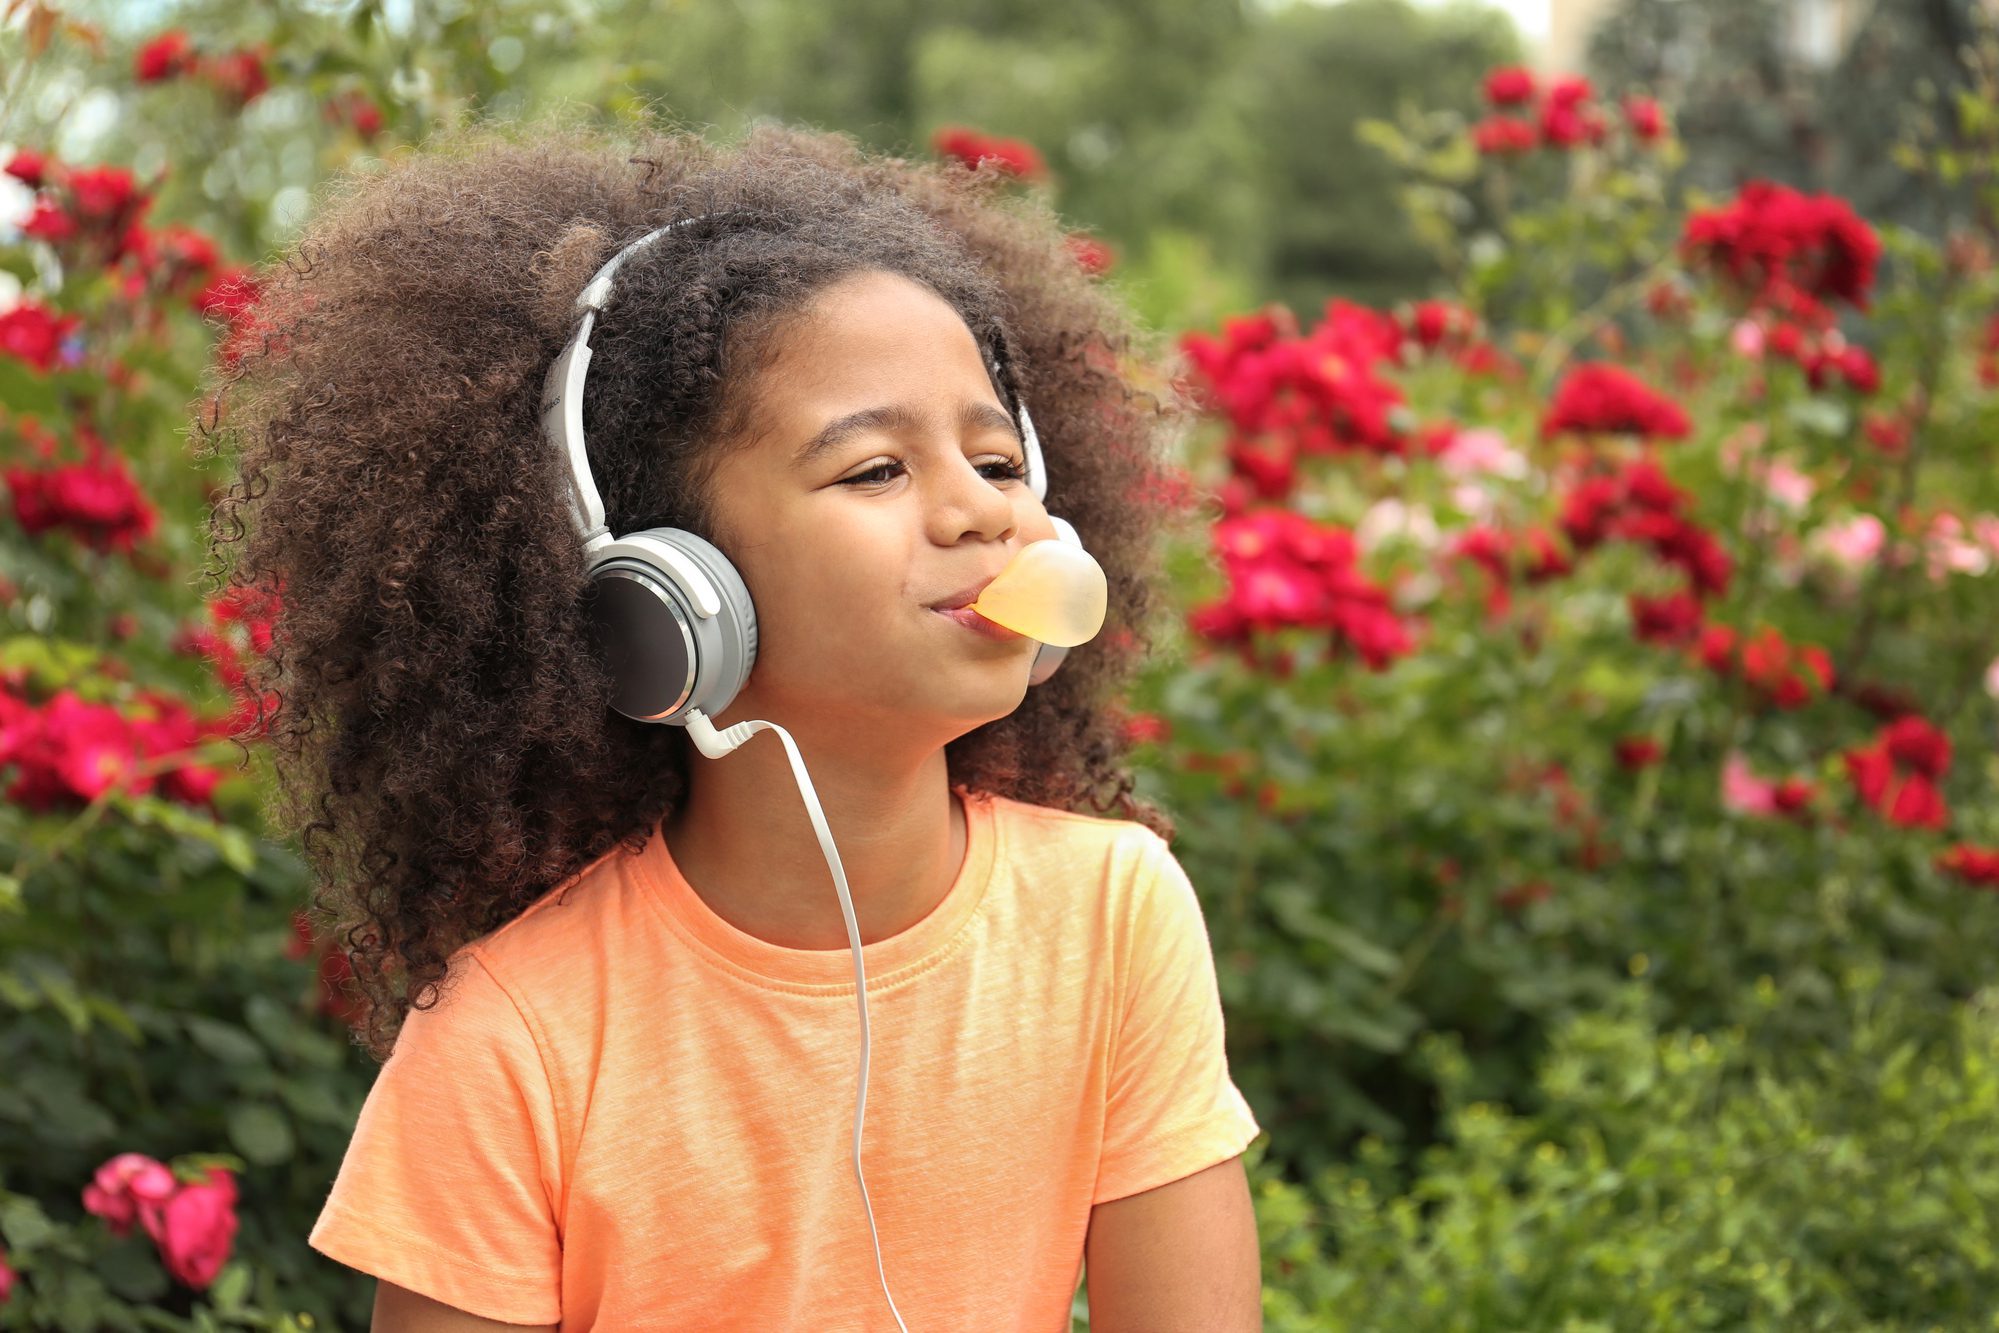 Little girl with headphones chewing bubblegum in the park